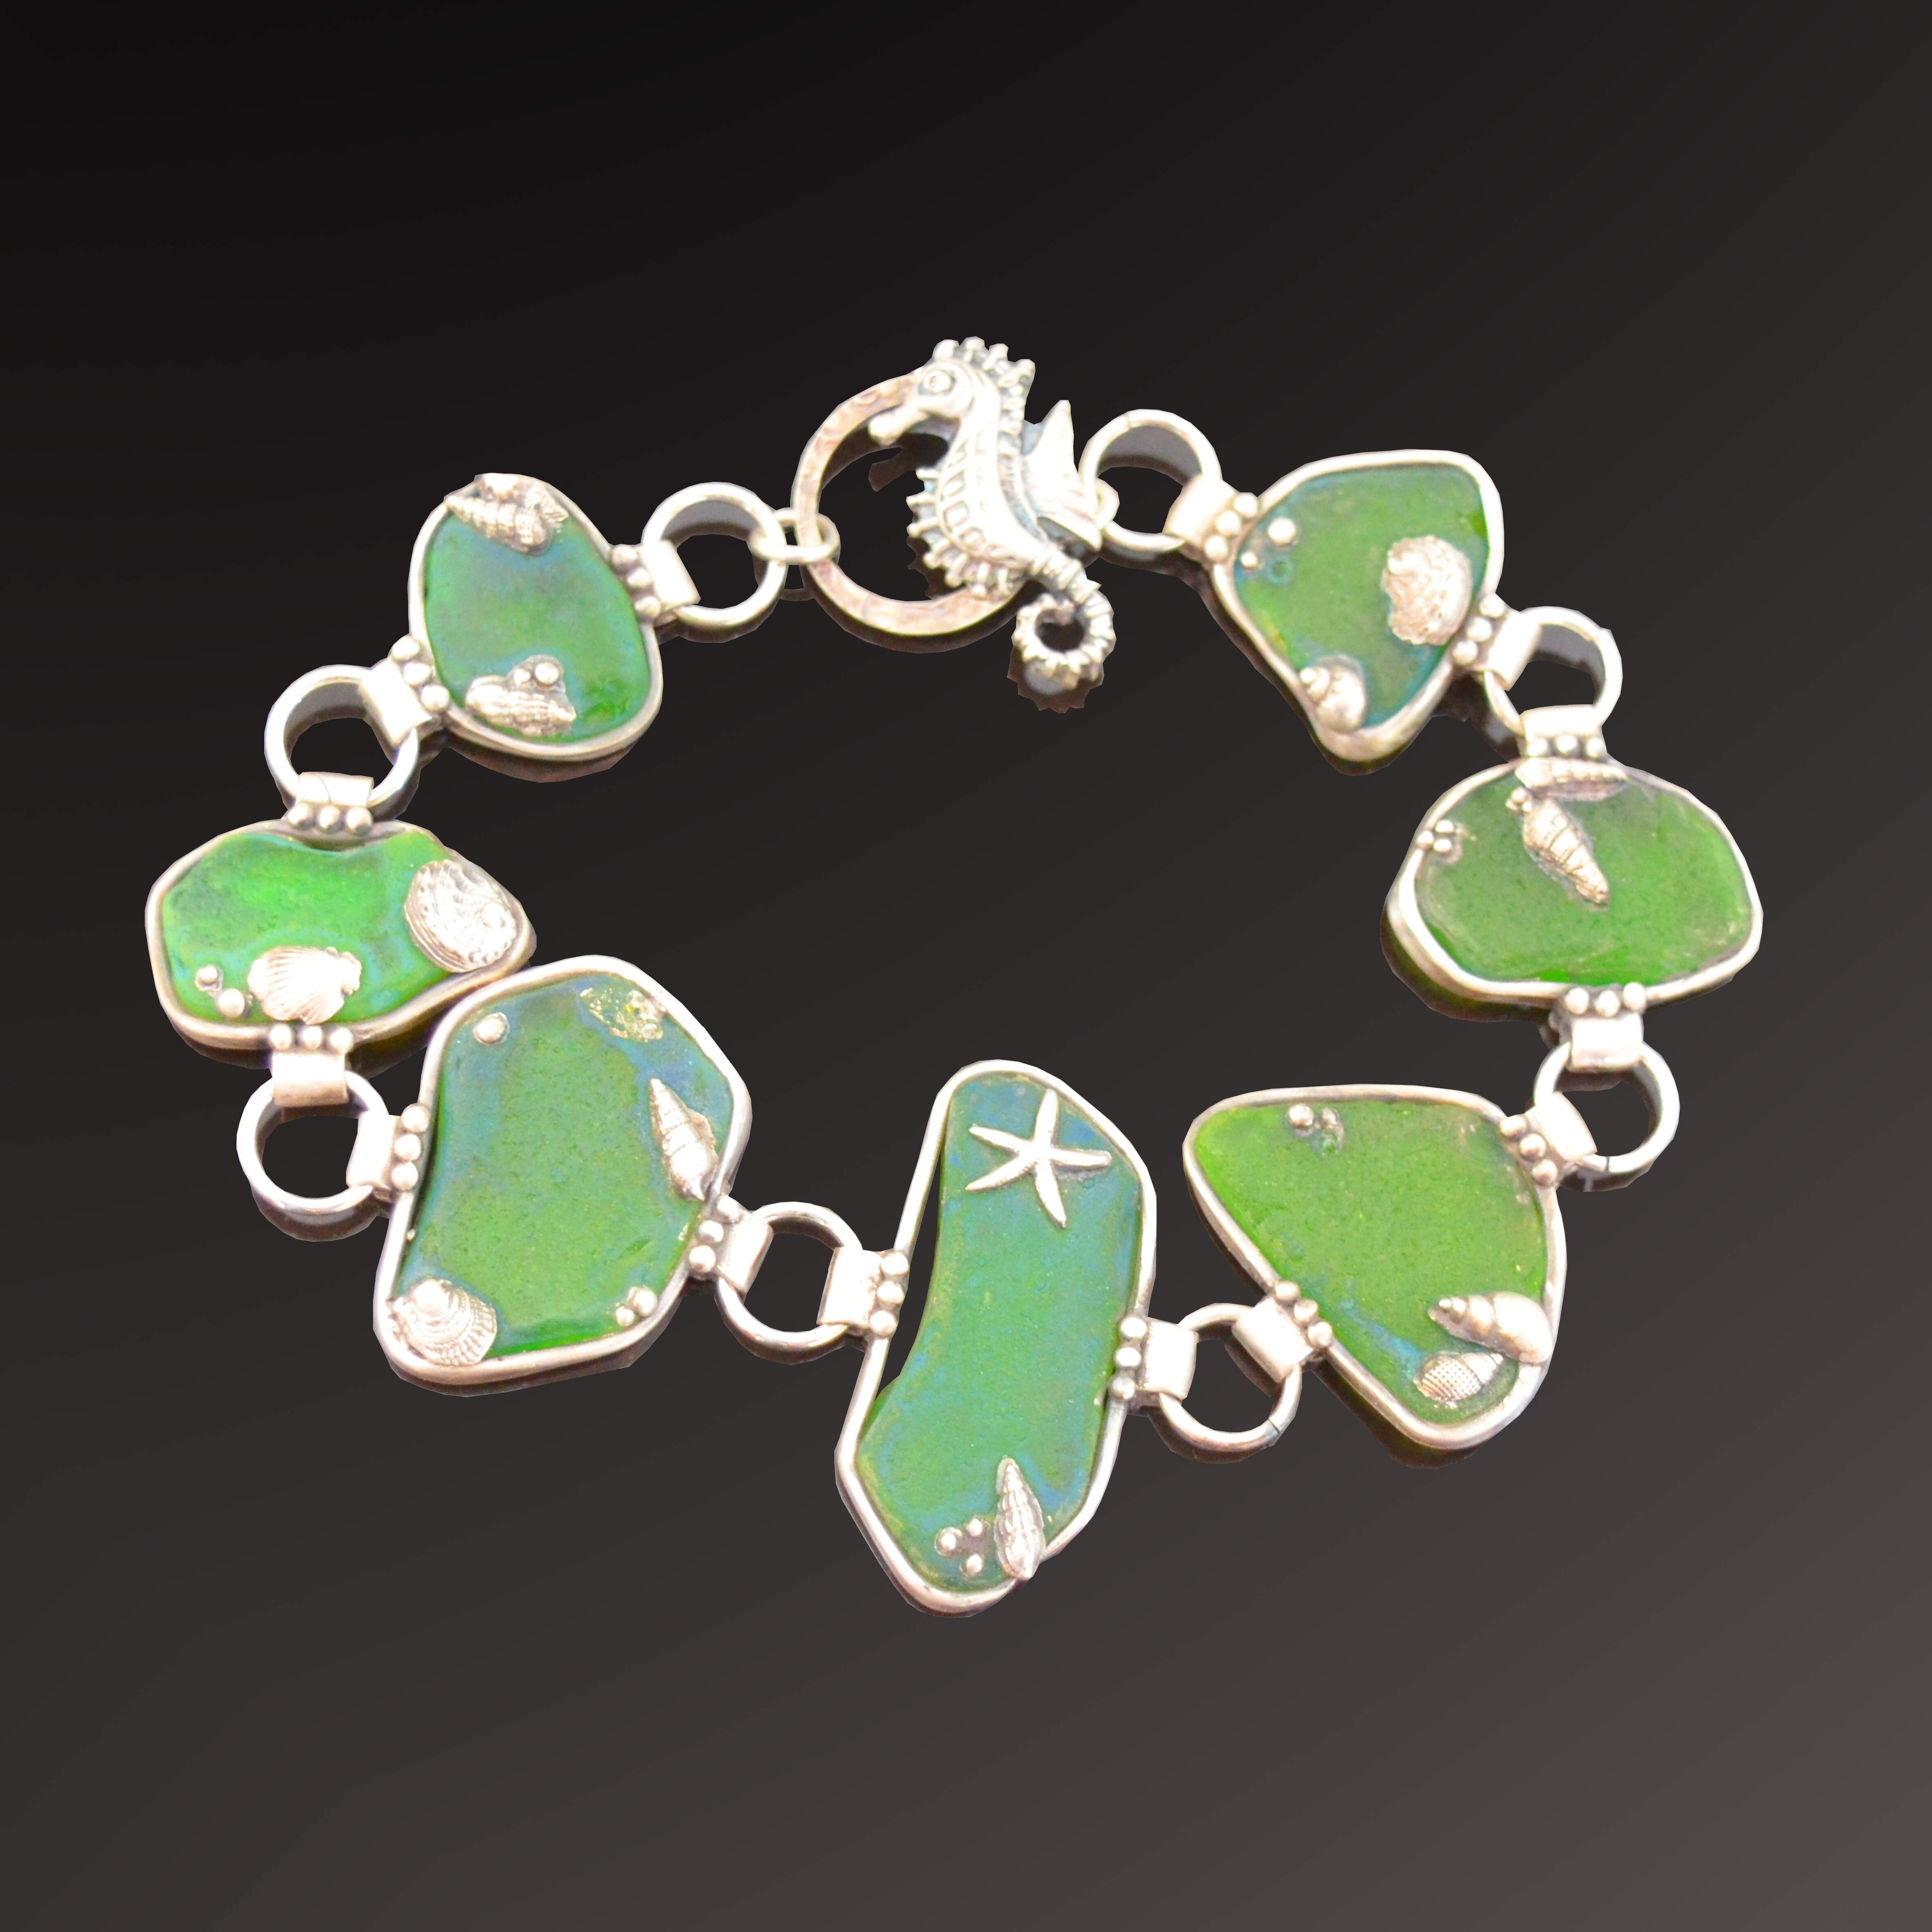 Sea Glass Silver Clay Rock Pool Bracelet by Tracey Spurgin of Craftworx Jewellery Workshops